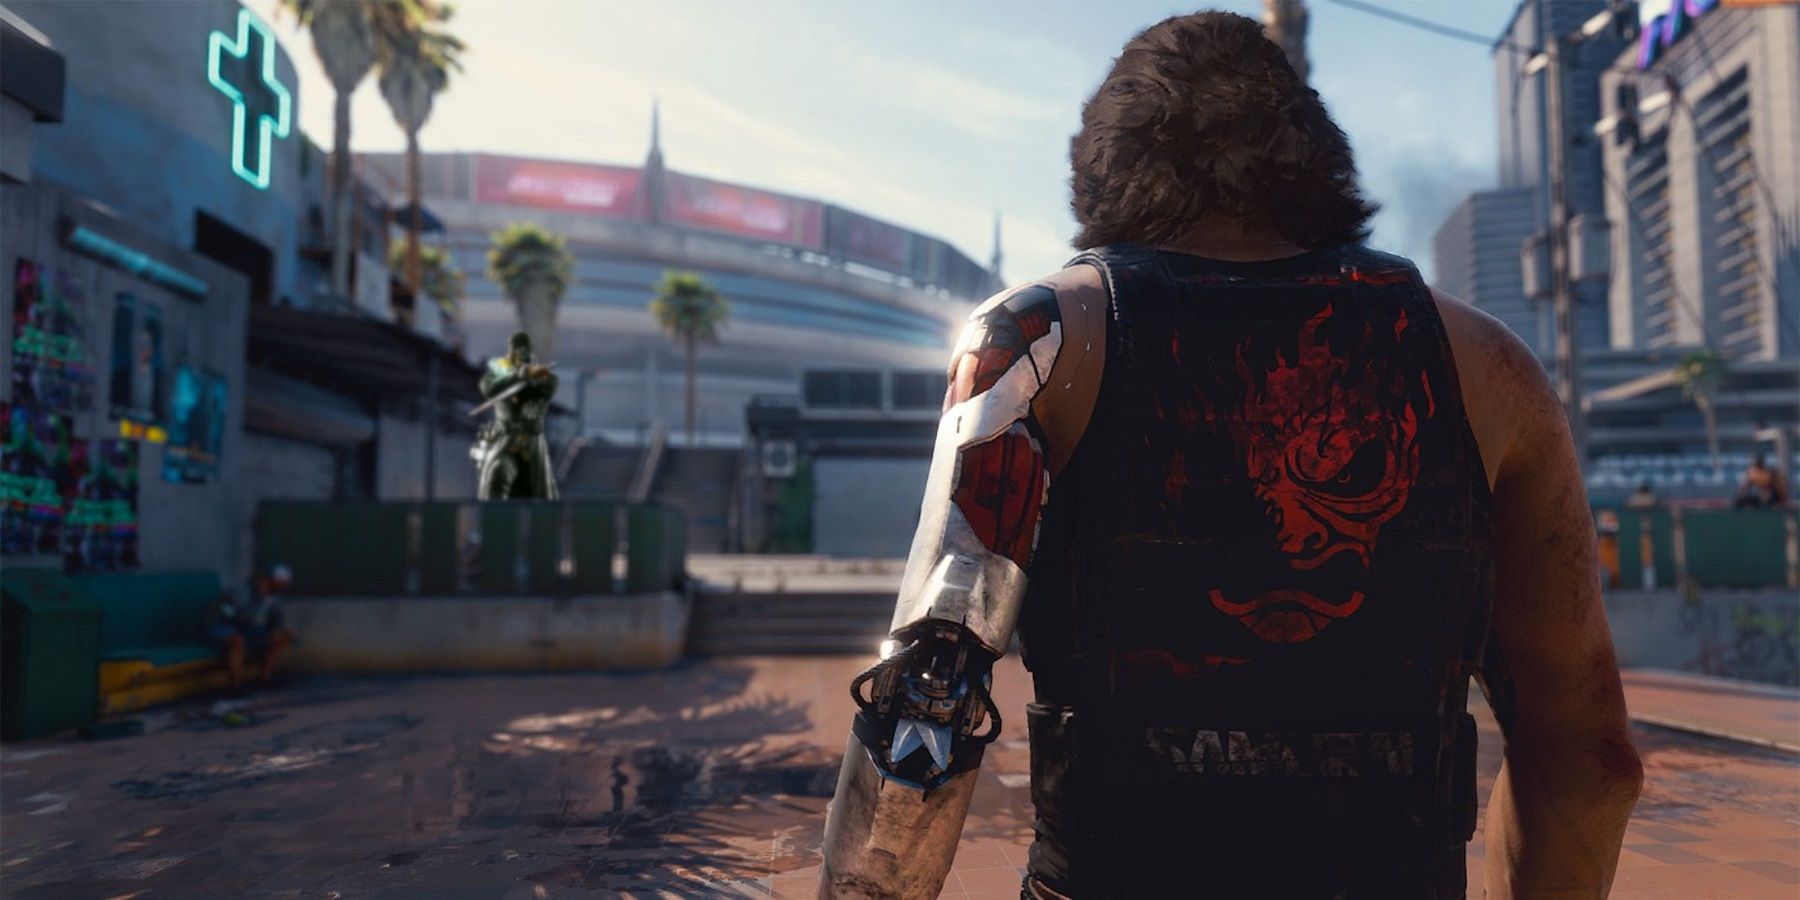 Johnny Silverhand from Cyberpunk 2077 walking towards Dishonored's Corvo in the background.